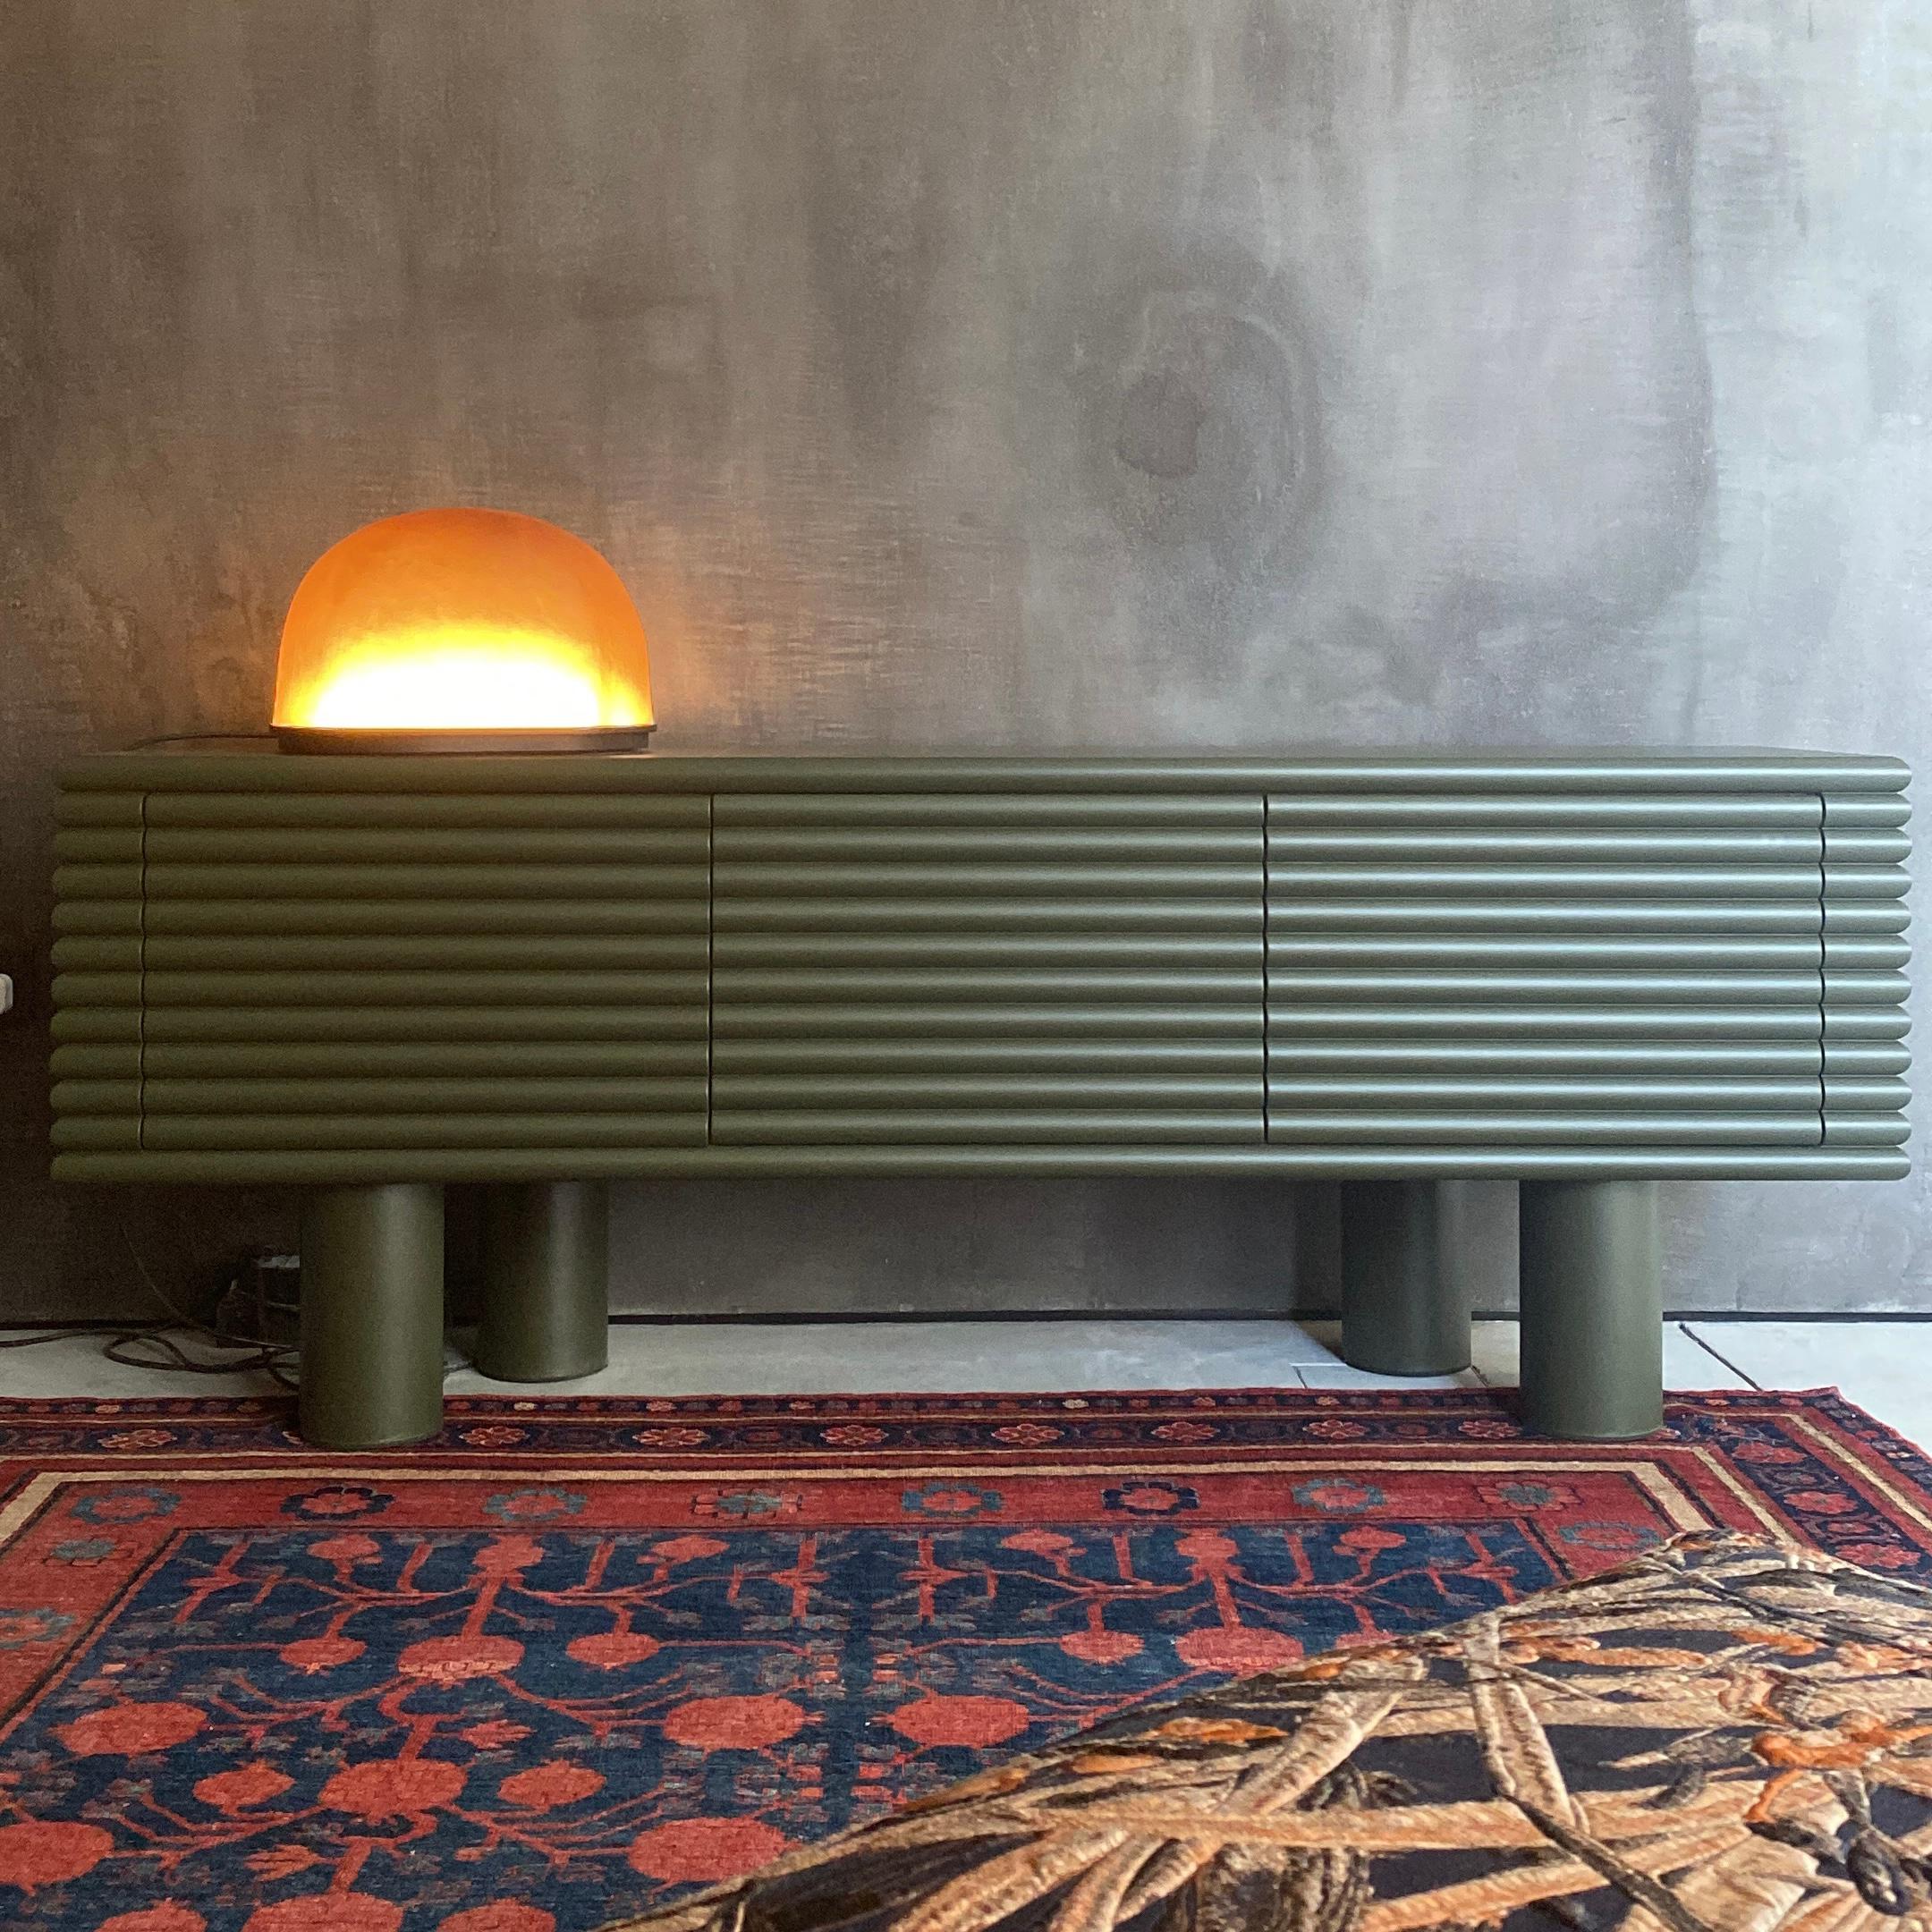 Scala Sideboard, designed by Stéphane Parmentier, is an elegant yet distinctive sideboard with three doors and covered with Light-grey Printed Calfskin Golf leather, and standing on a four-legs base. It features a distinctive design inspired by the